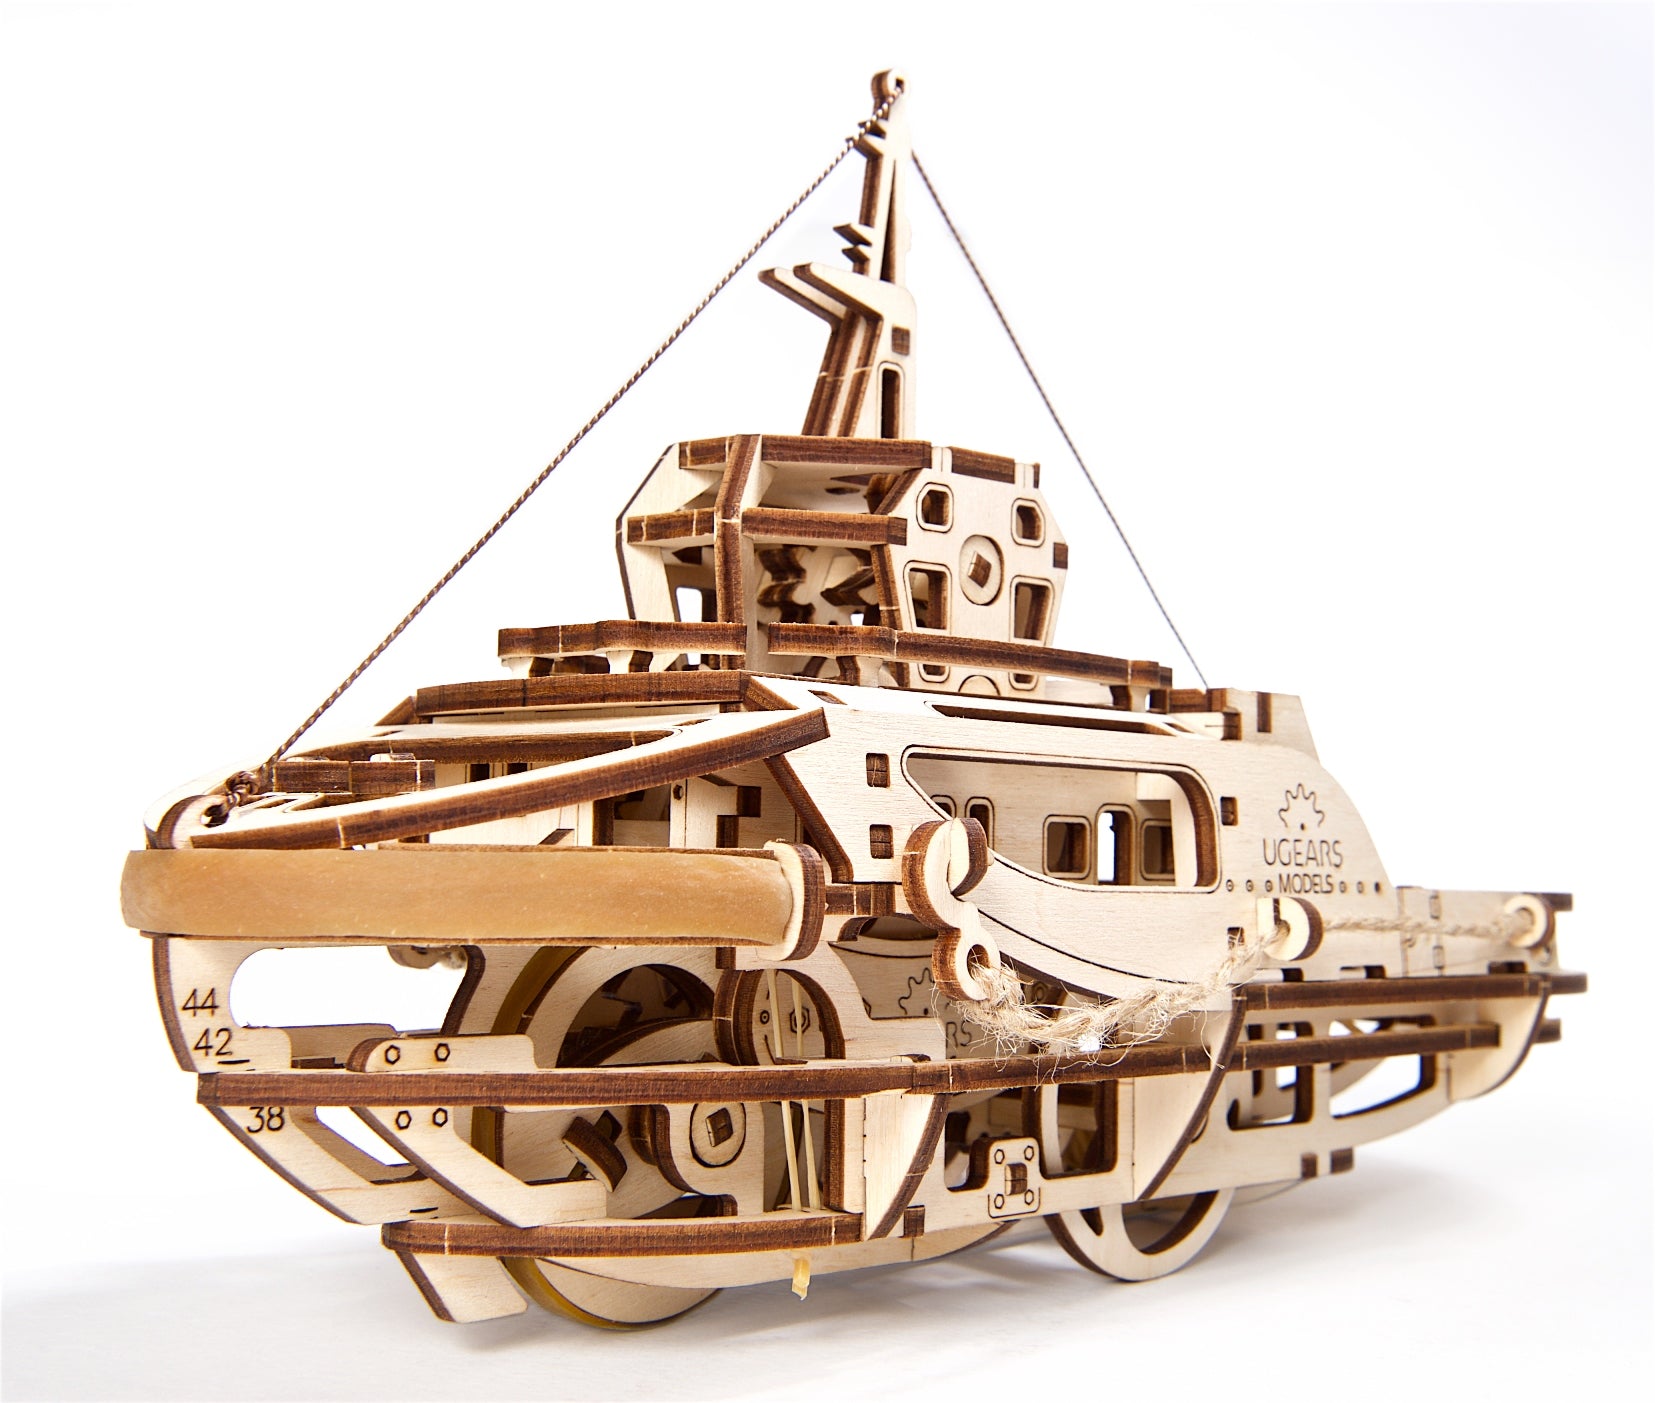 Tugboat Build Your Own Moving Model By Ugears Ugears Mechanical Models